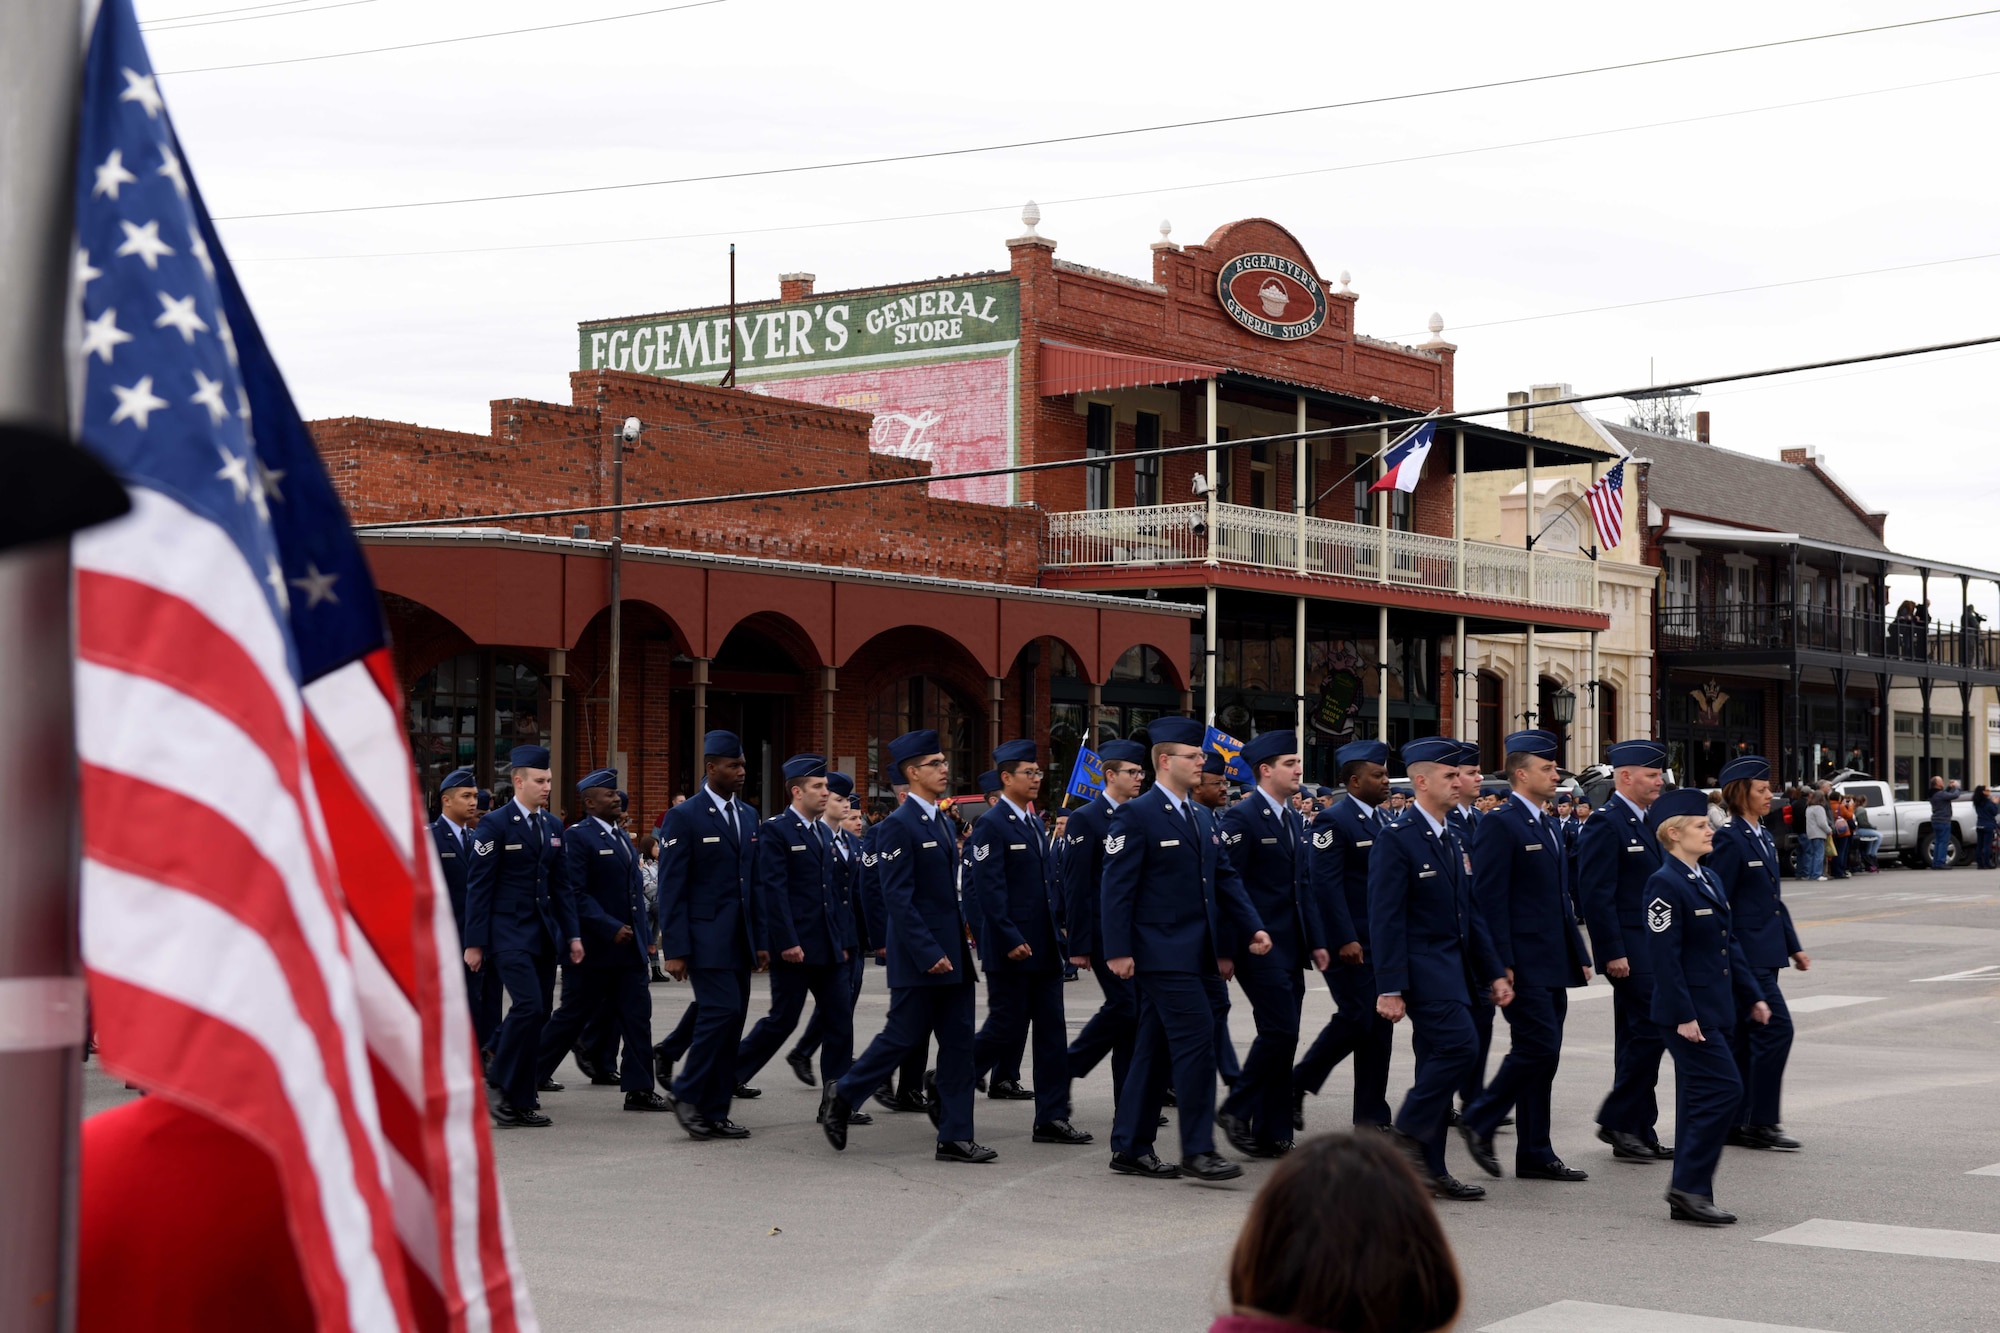 Airmen from the 17th Medical Group march in the Veterans Day Parade in San Angelo, Texas, Nov. 10, 2018. The parade featured veterans, active duty members and marching bands. (U.S. Air Force photo by Senior Airman Randall Moose/Released)